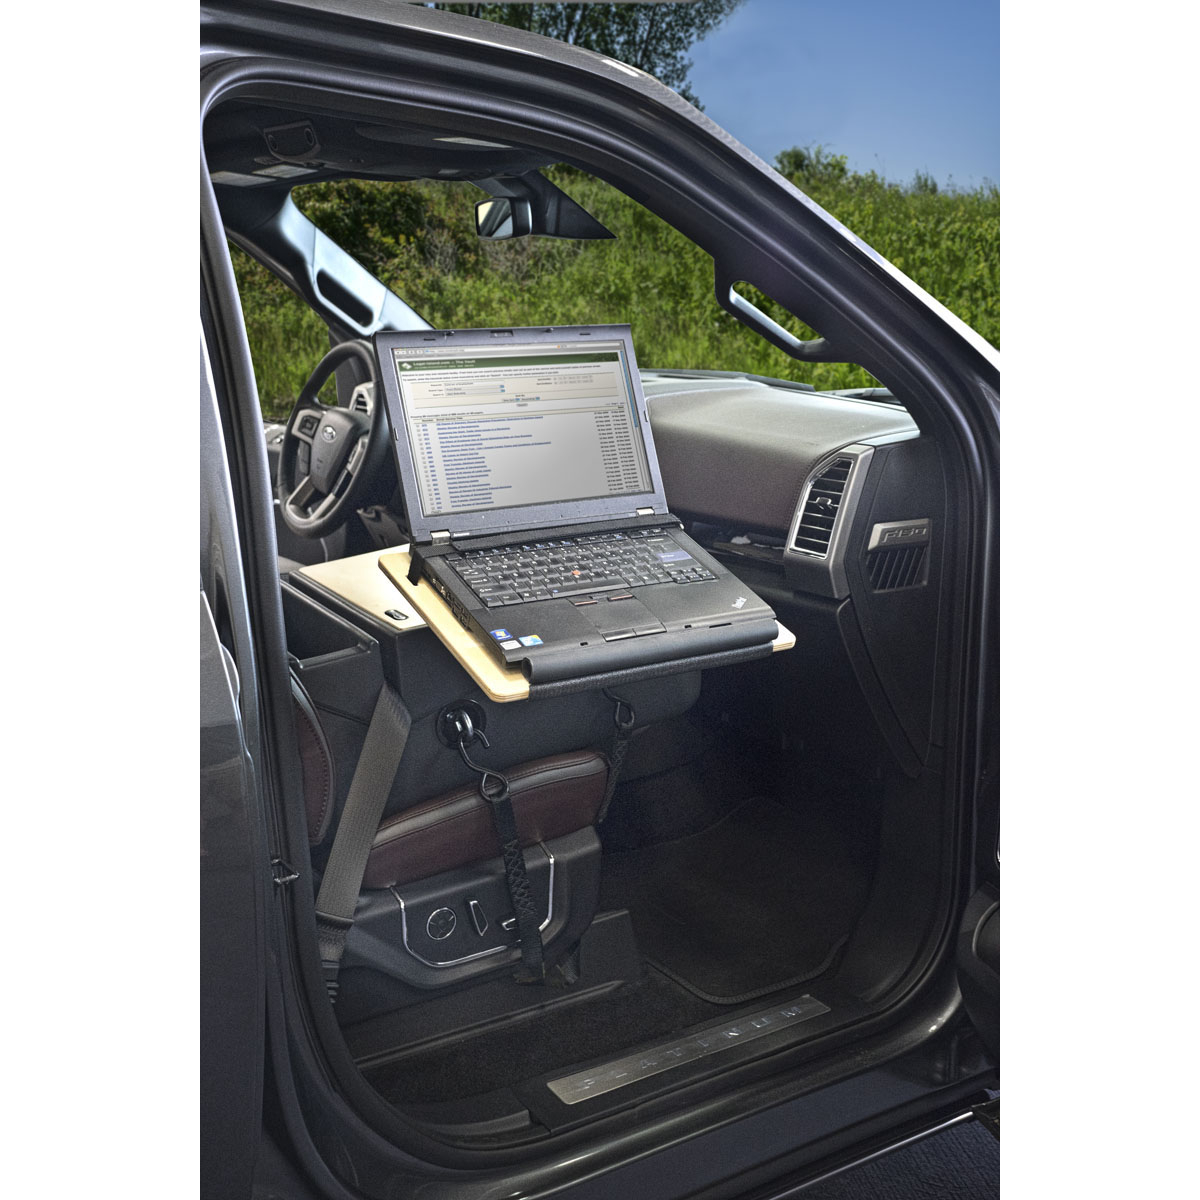 AutoExec AUE10075 Reach Front Seat Car Desk Black with with Built-in Power Inverter and X-Grip Phone Mount 